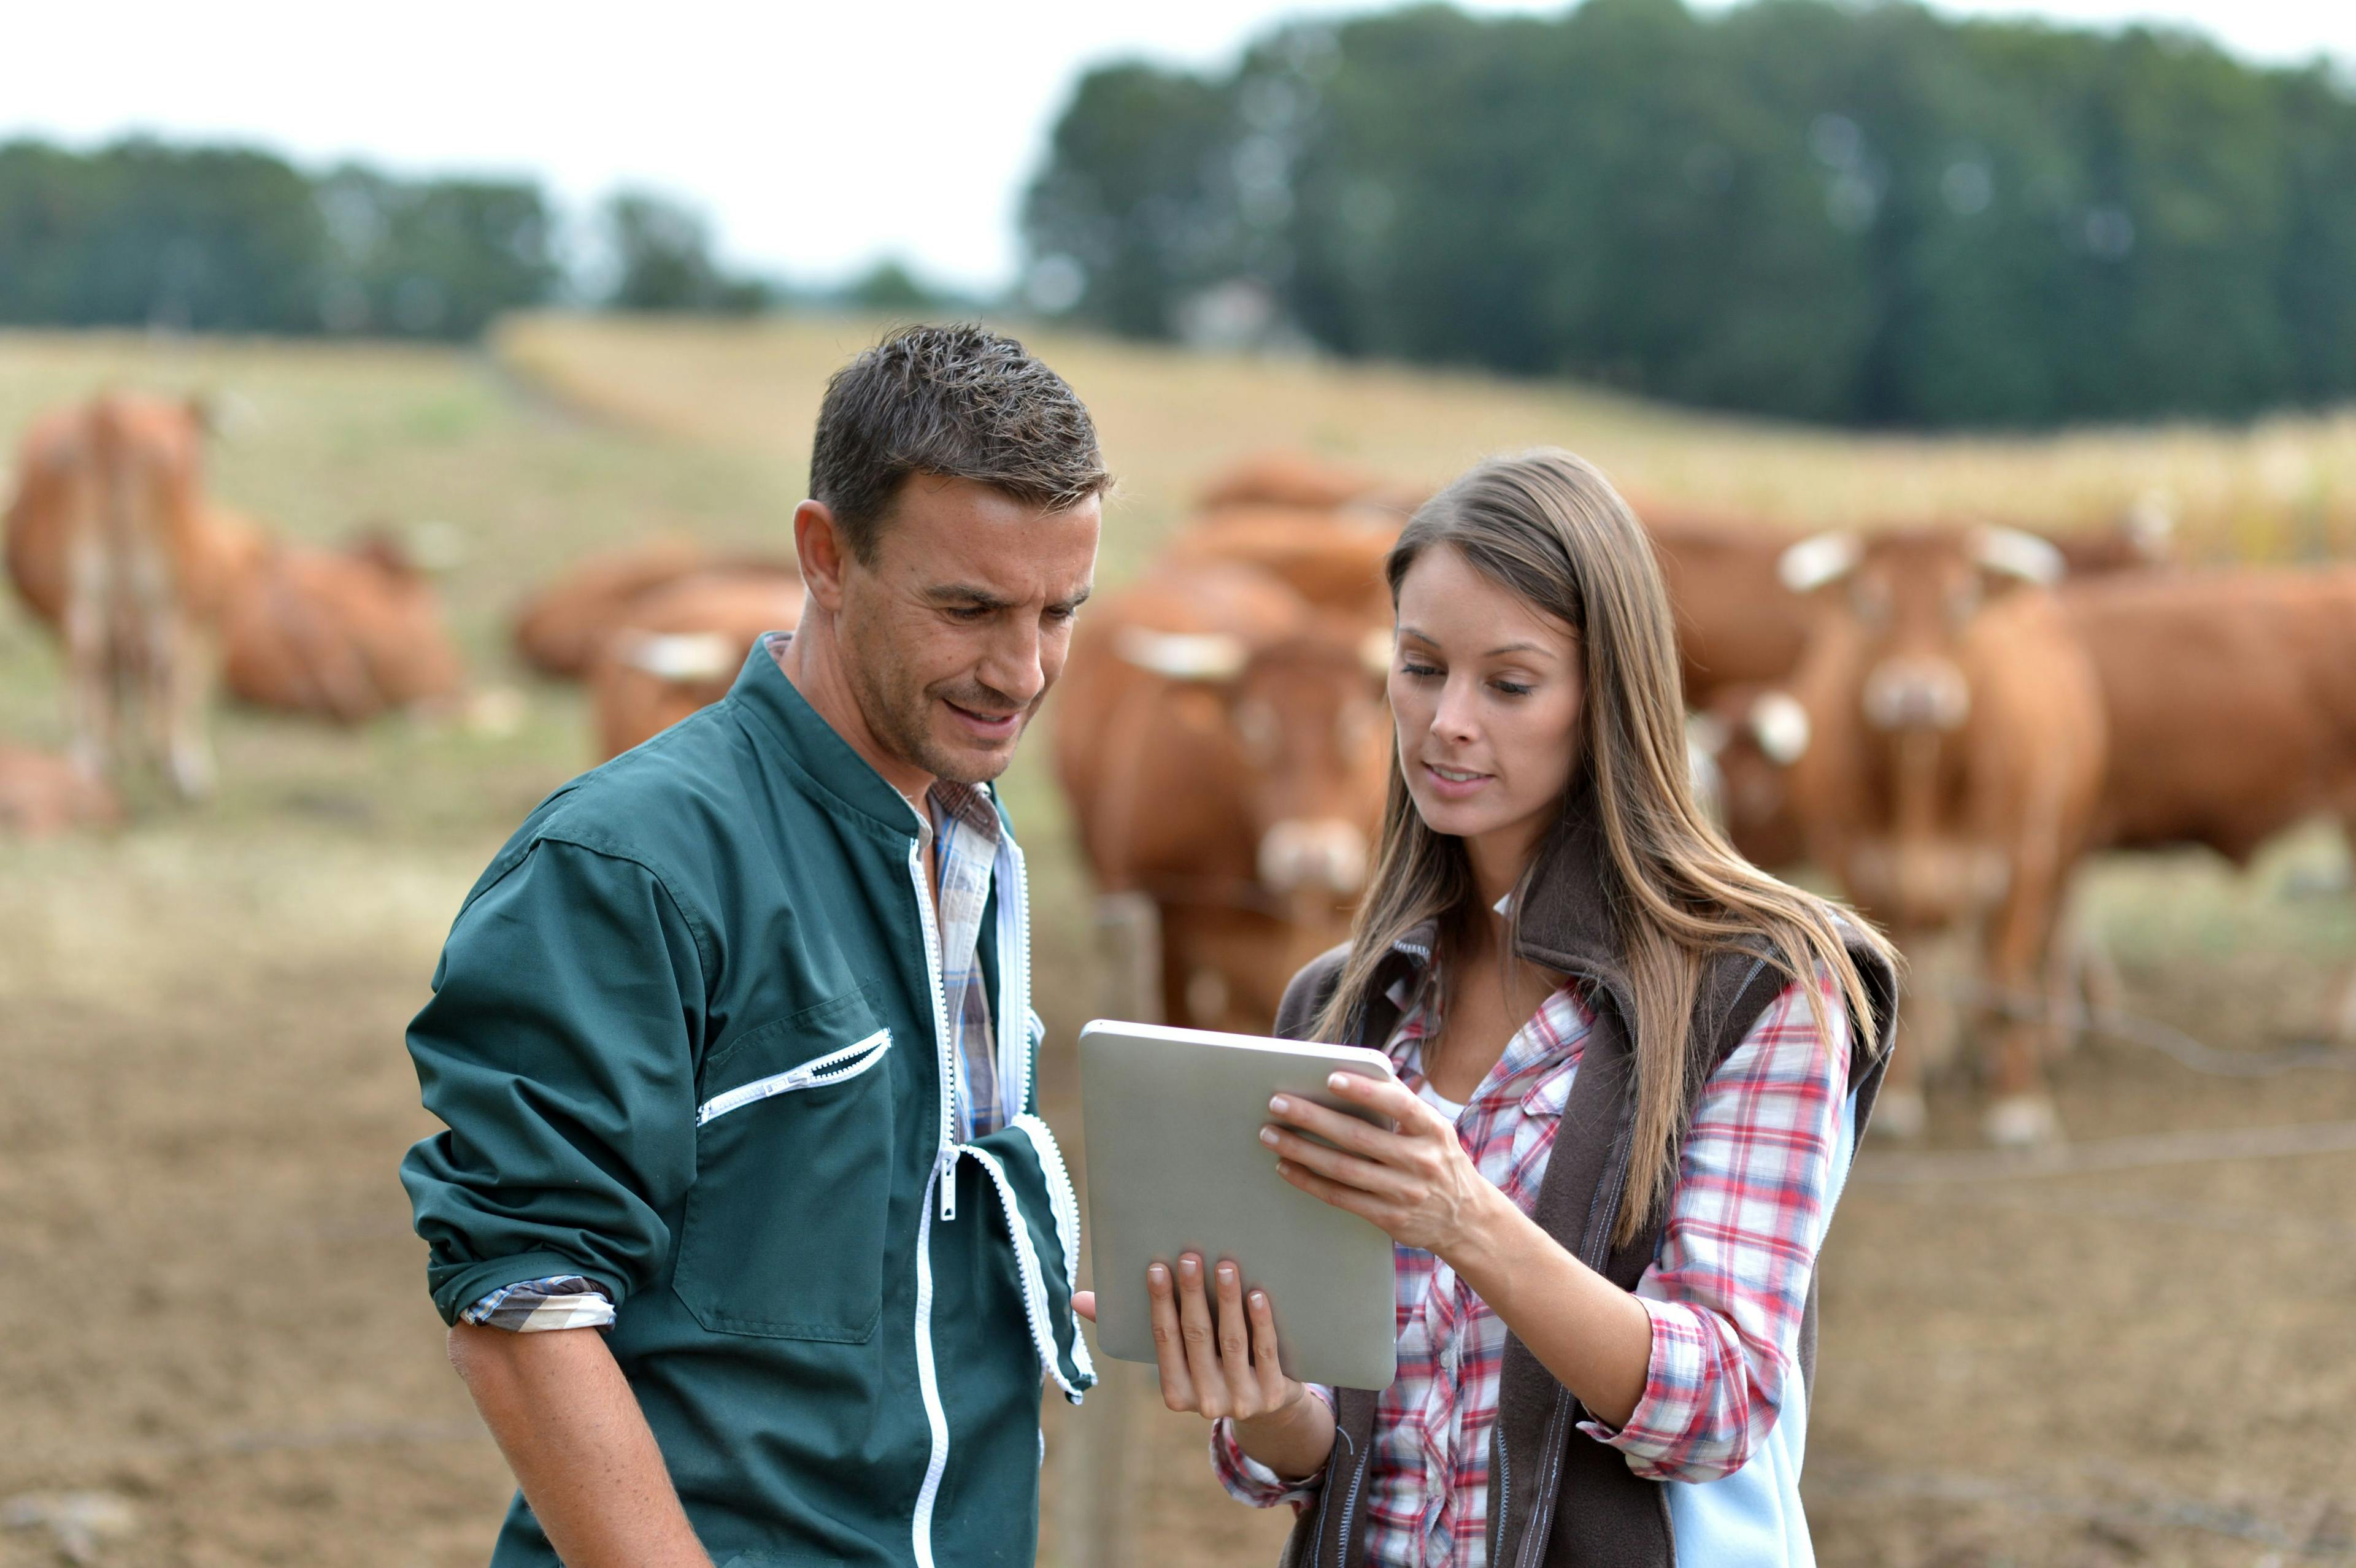 Agriculture and livestock technology